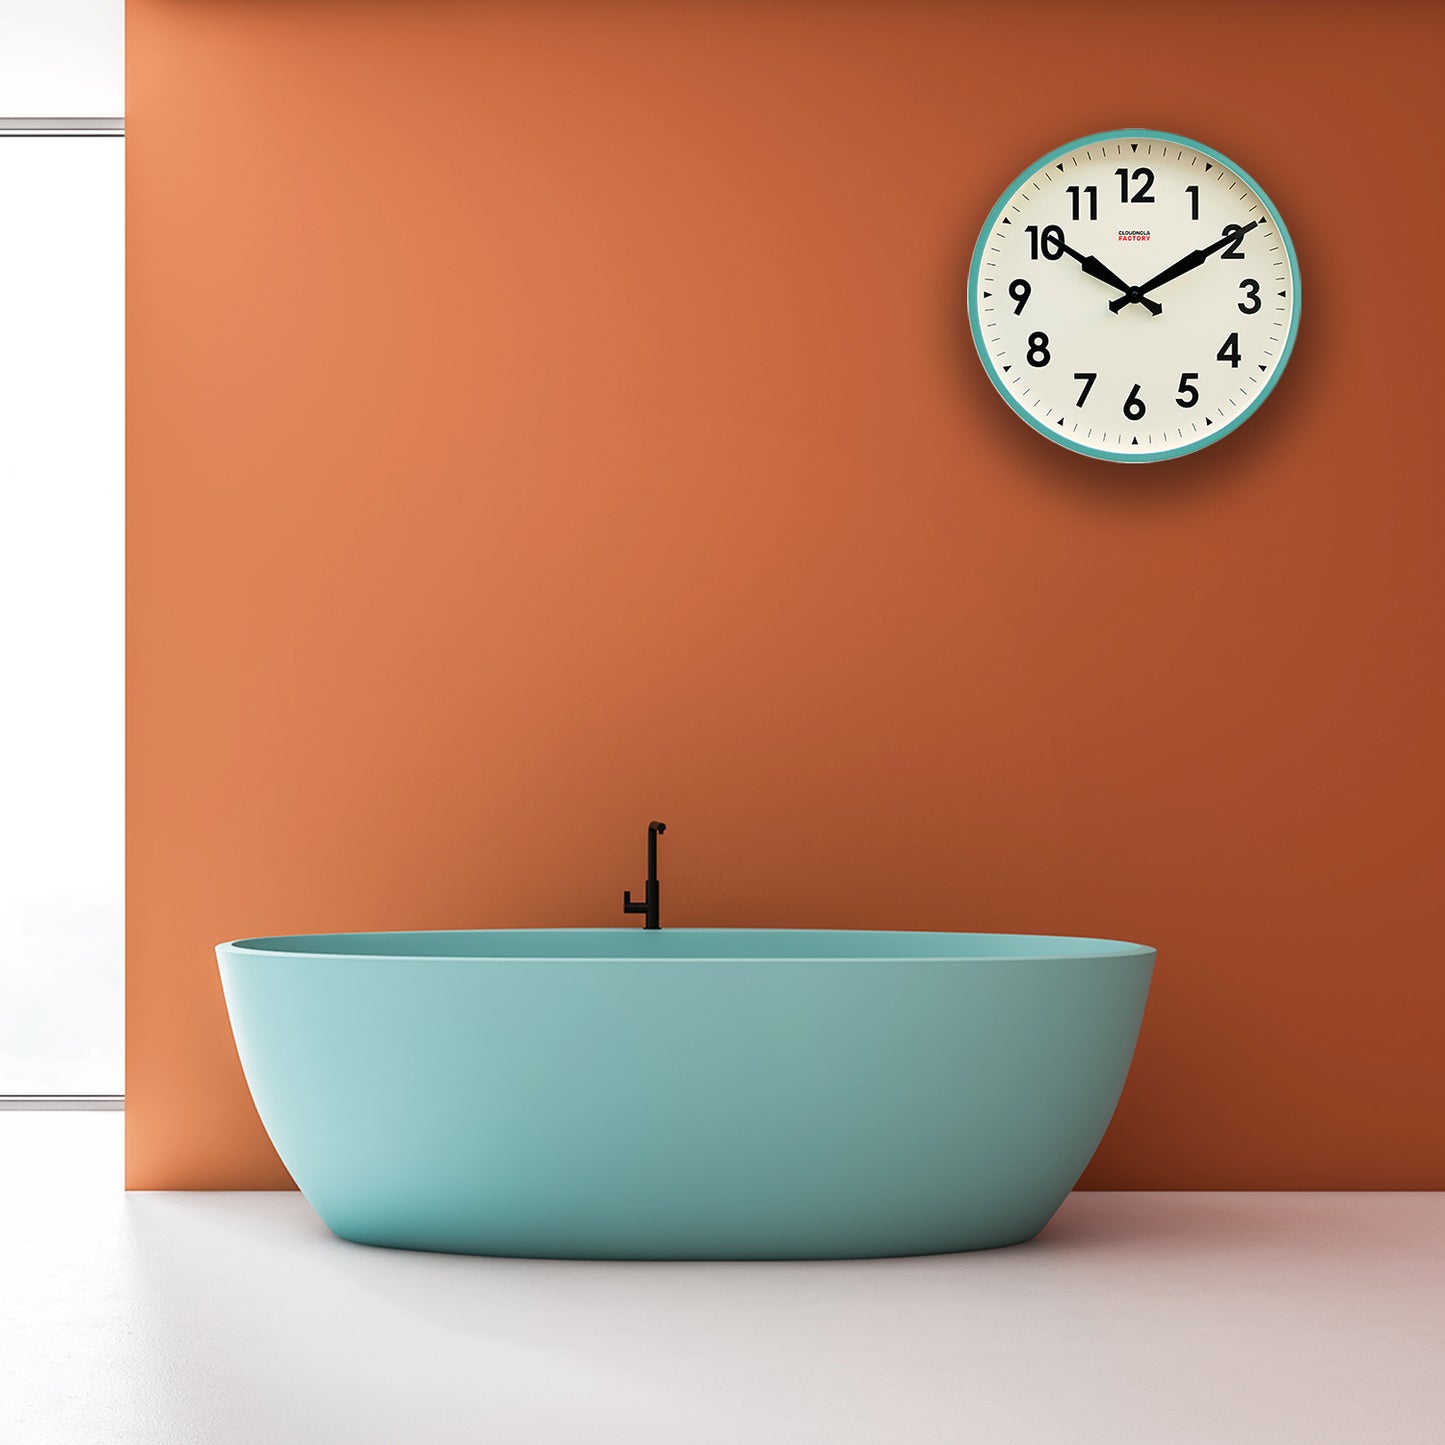 Factory XL Turquoise - Diameter 17.7 - Wall Clock - Silent - Steel Case